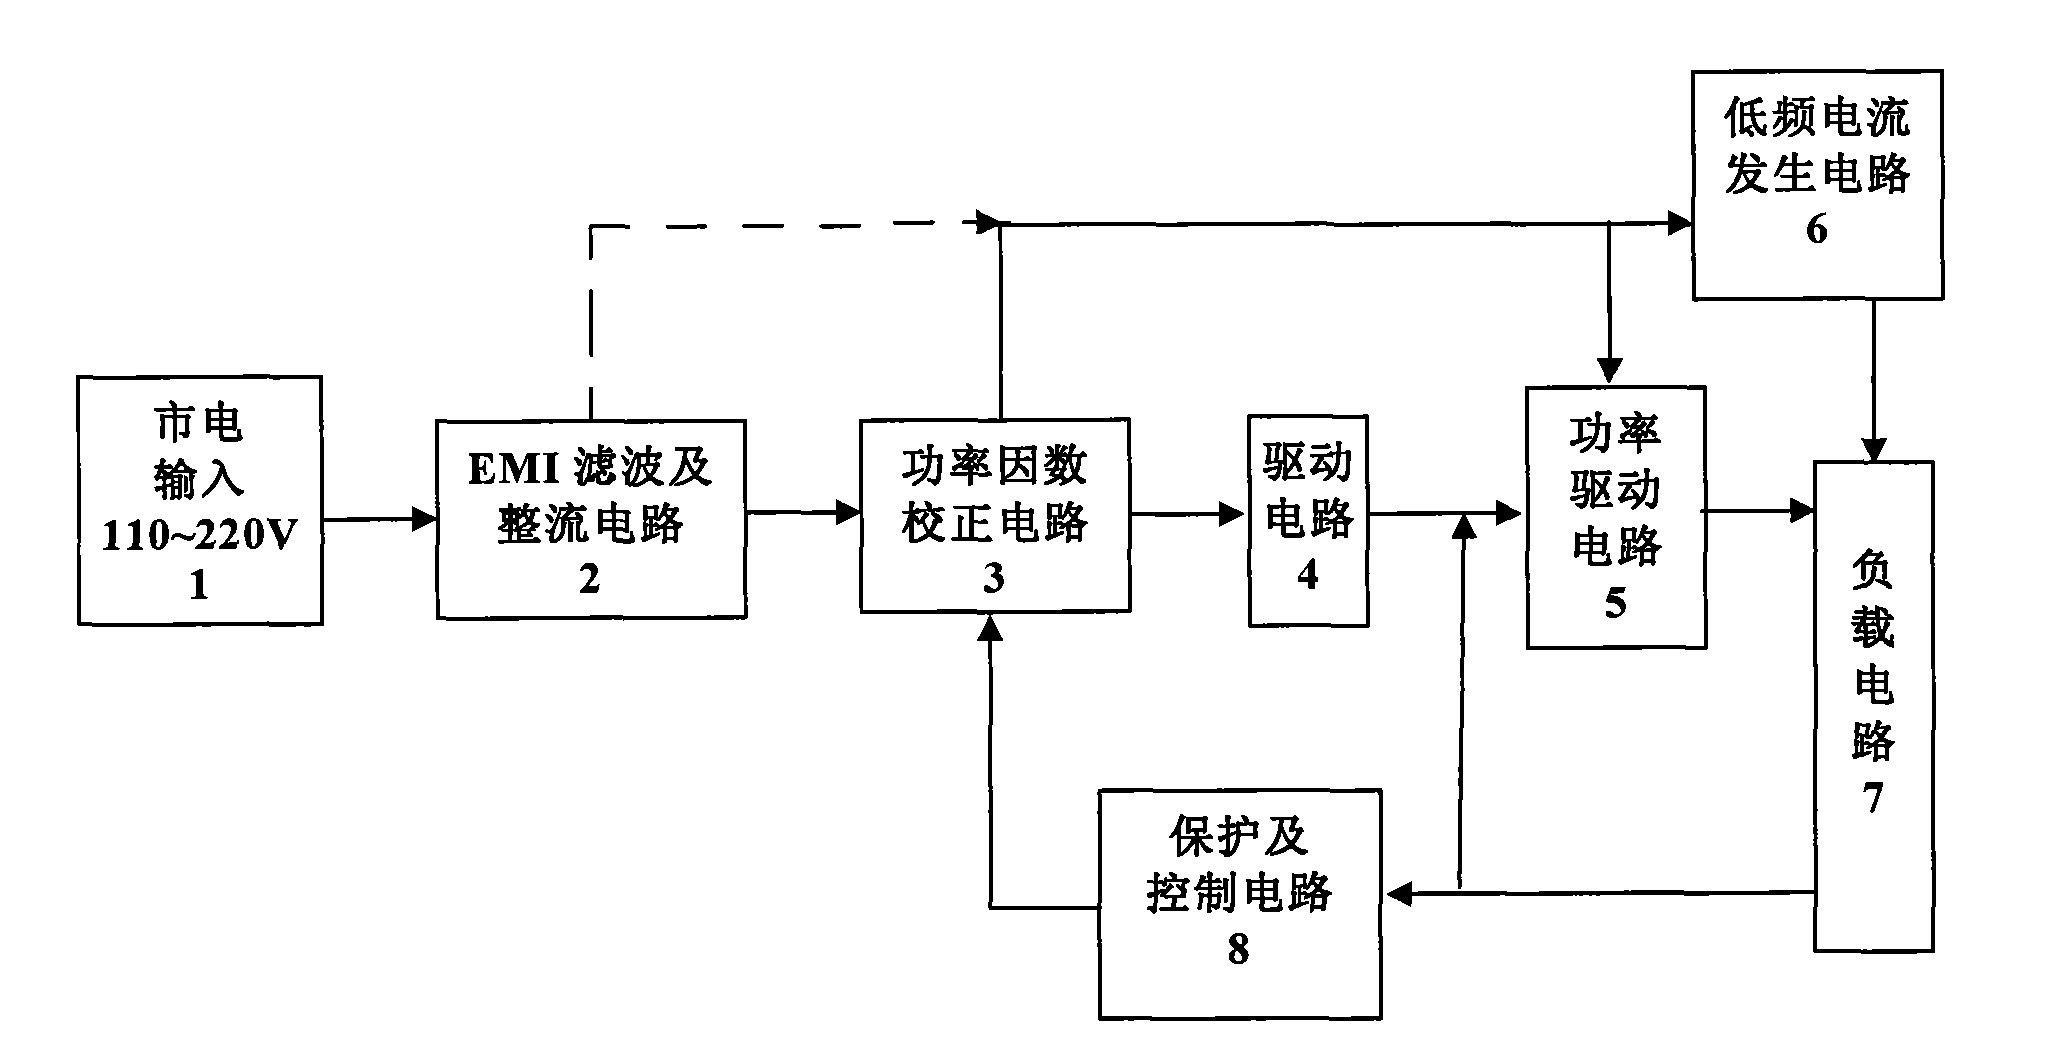 HID electronic ballast and lighting device with same